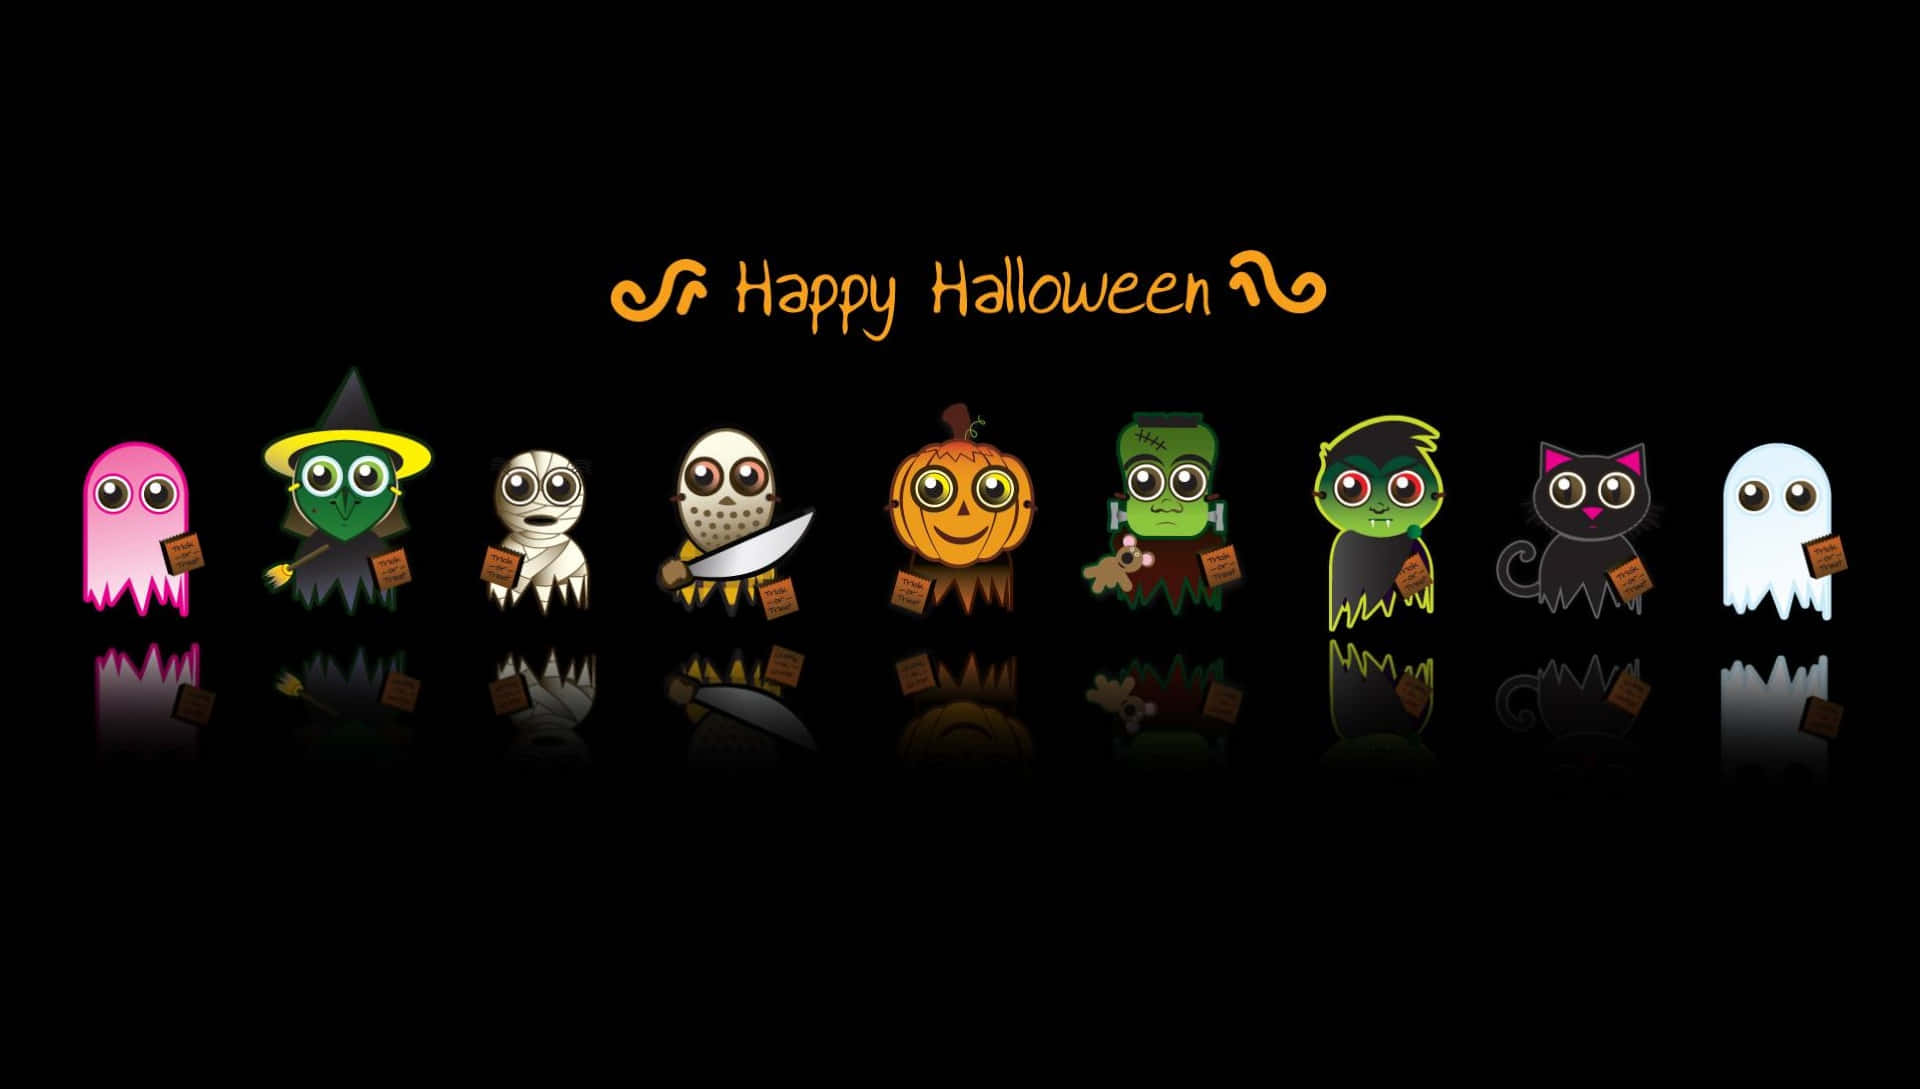 Get Into The Spooky Spirit This Halloween! Wallpaper